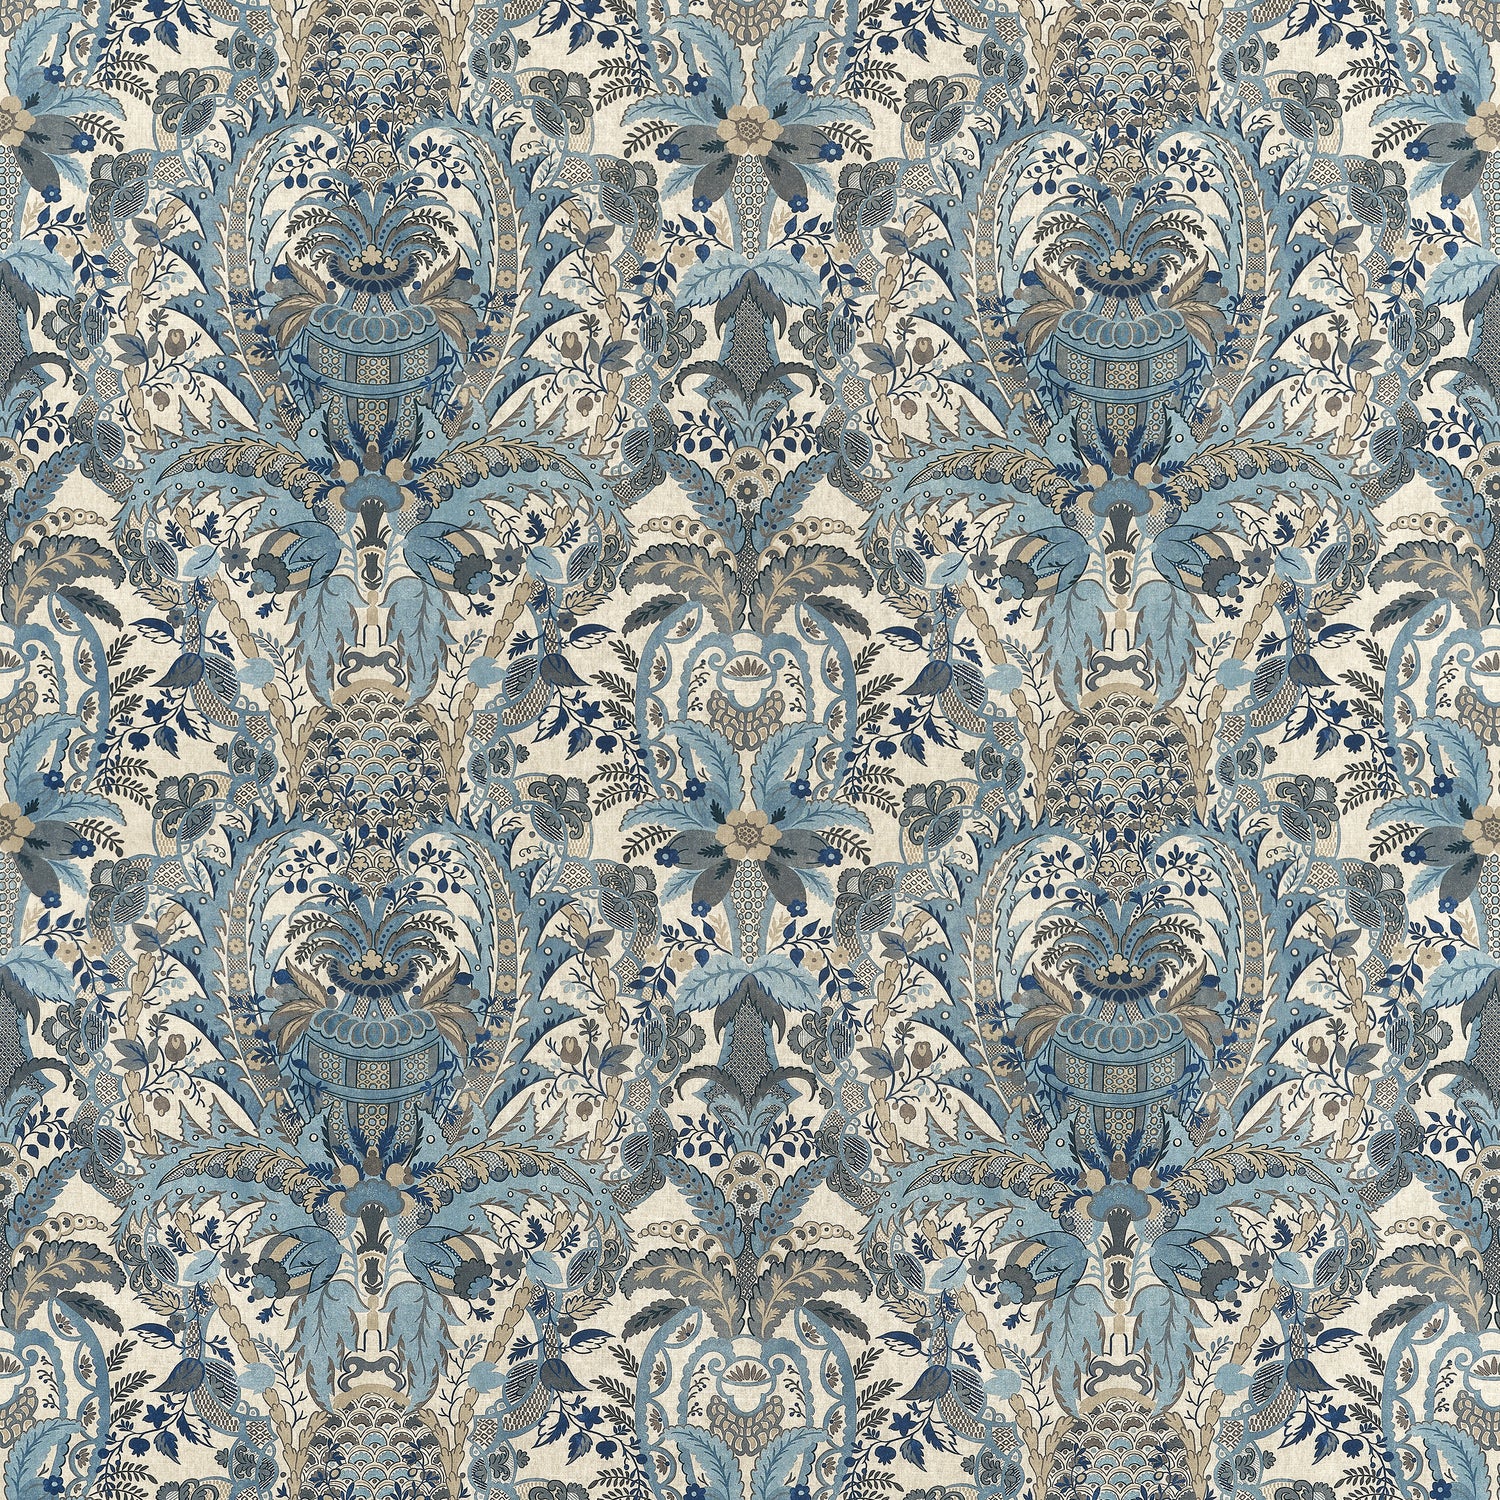 Narbeth fabric in slate and grey color - pattern number AF57862 - by Anna French in the Bristol collection